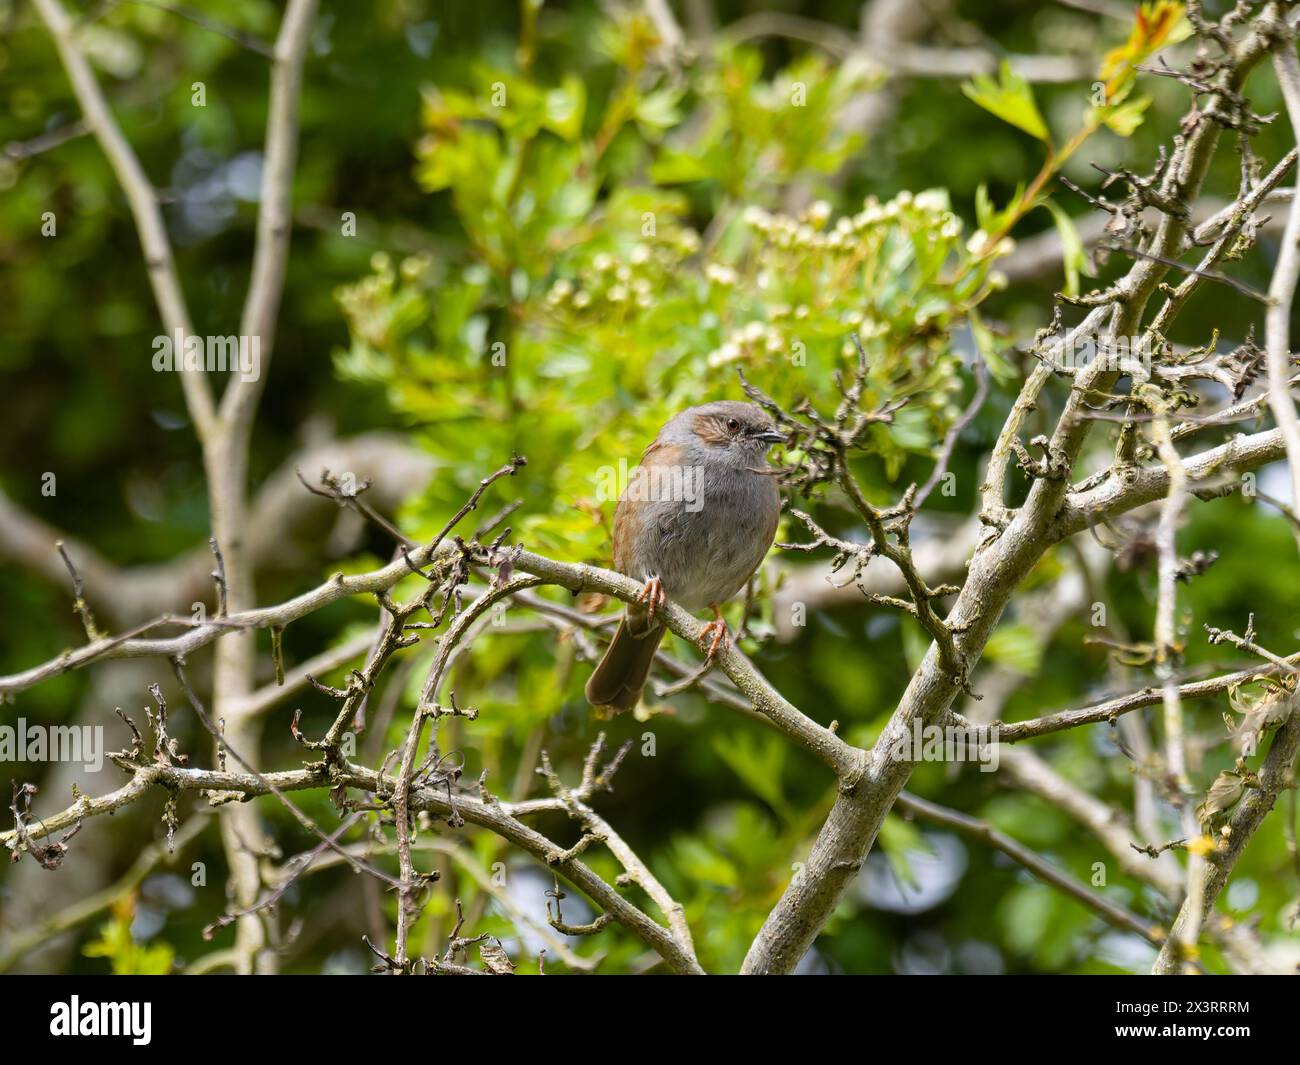 A dunnock, Prunella modularis, perched on a branch. Stock Photo